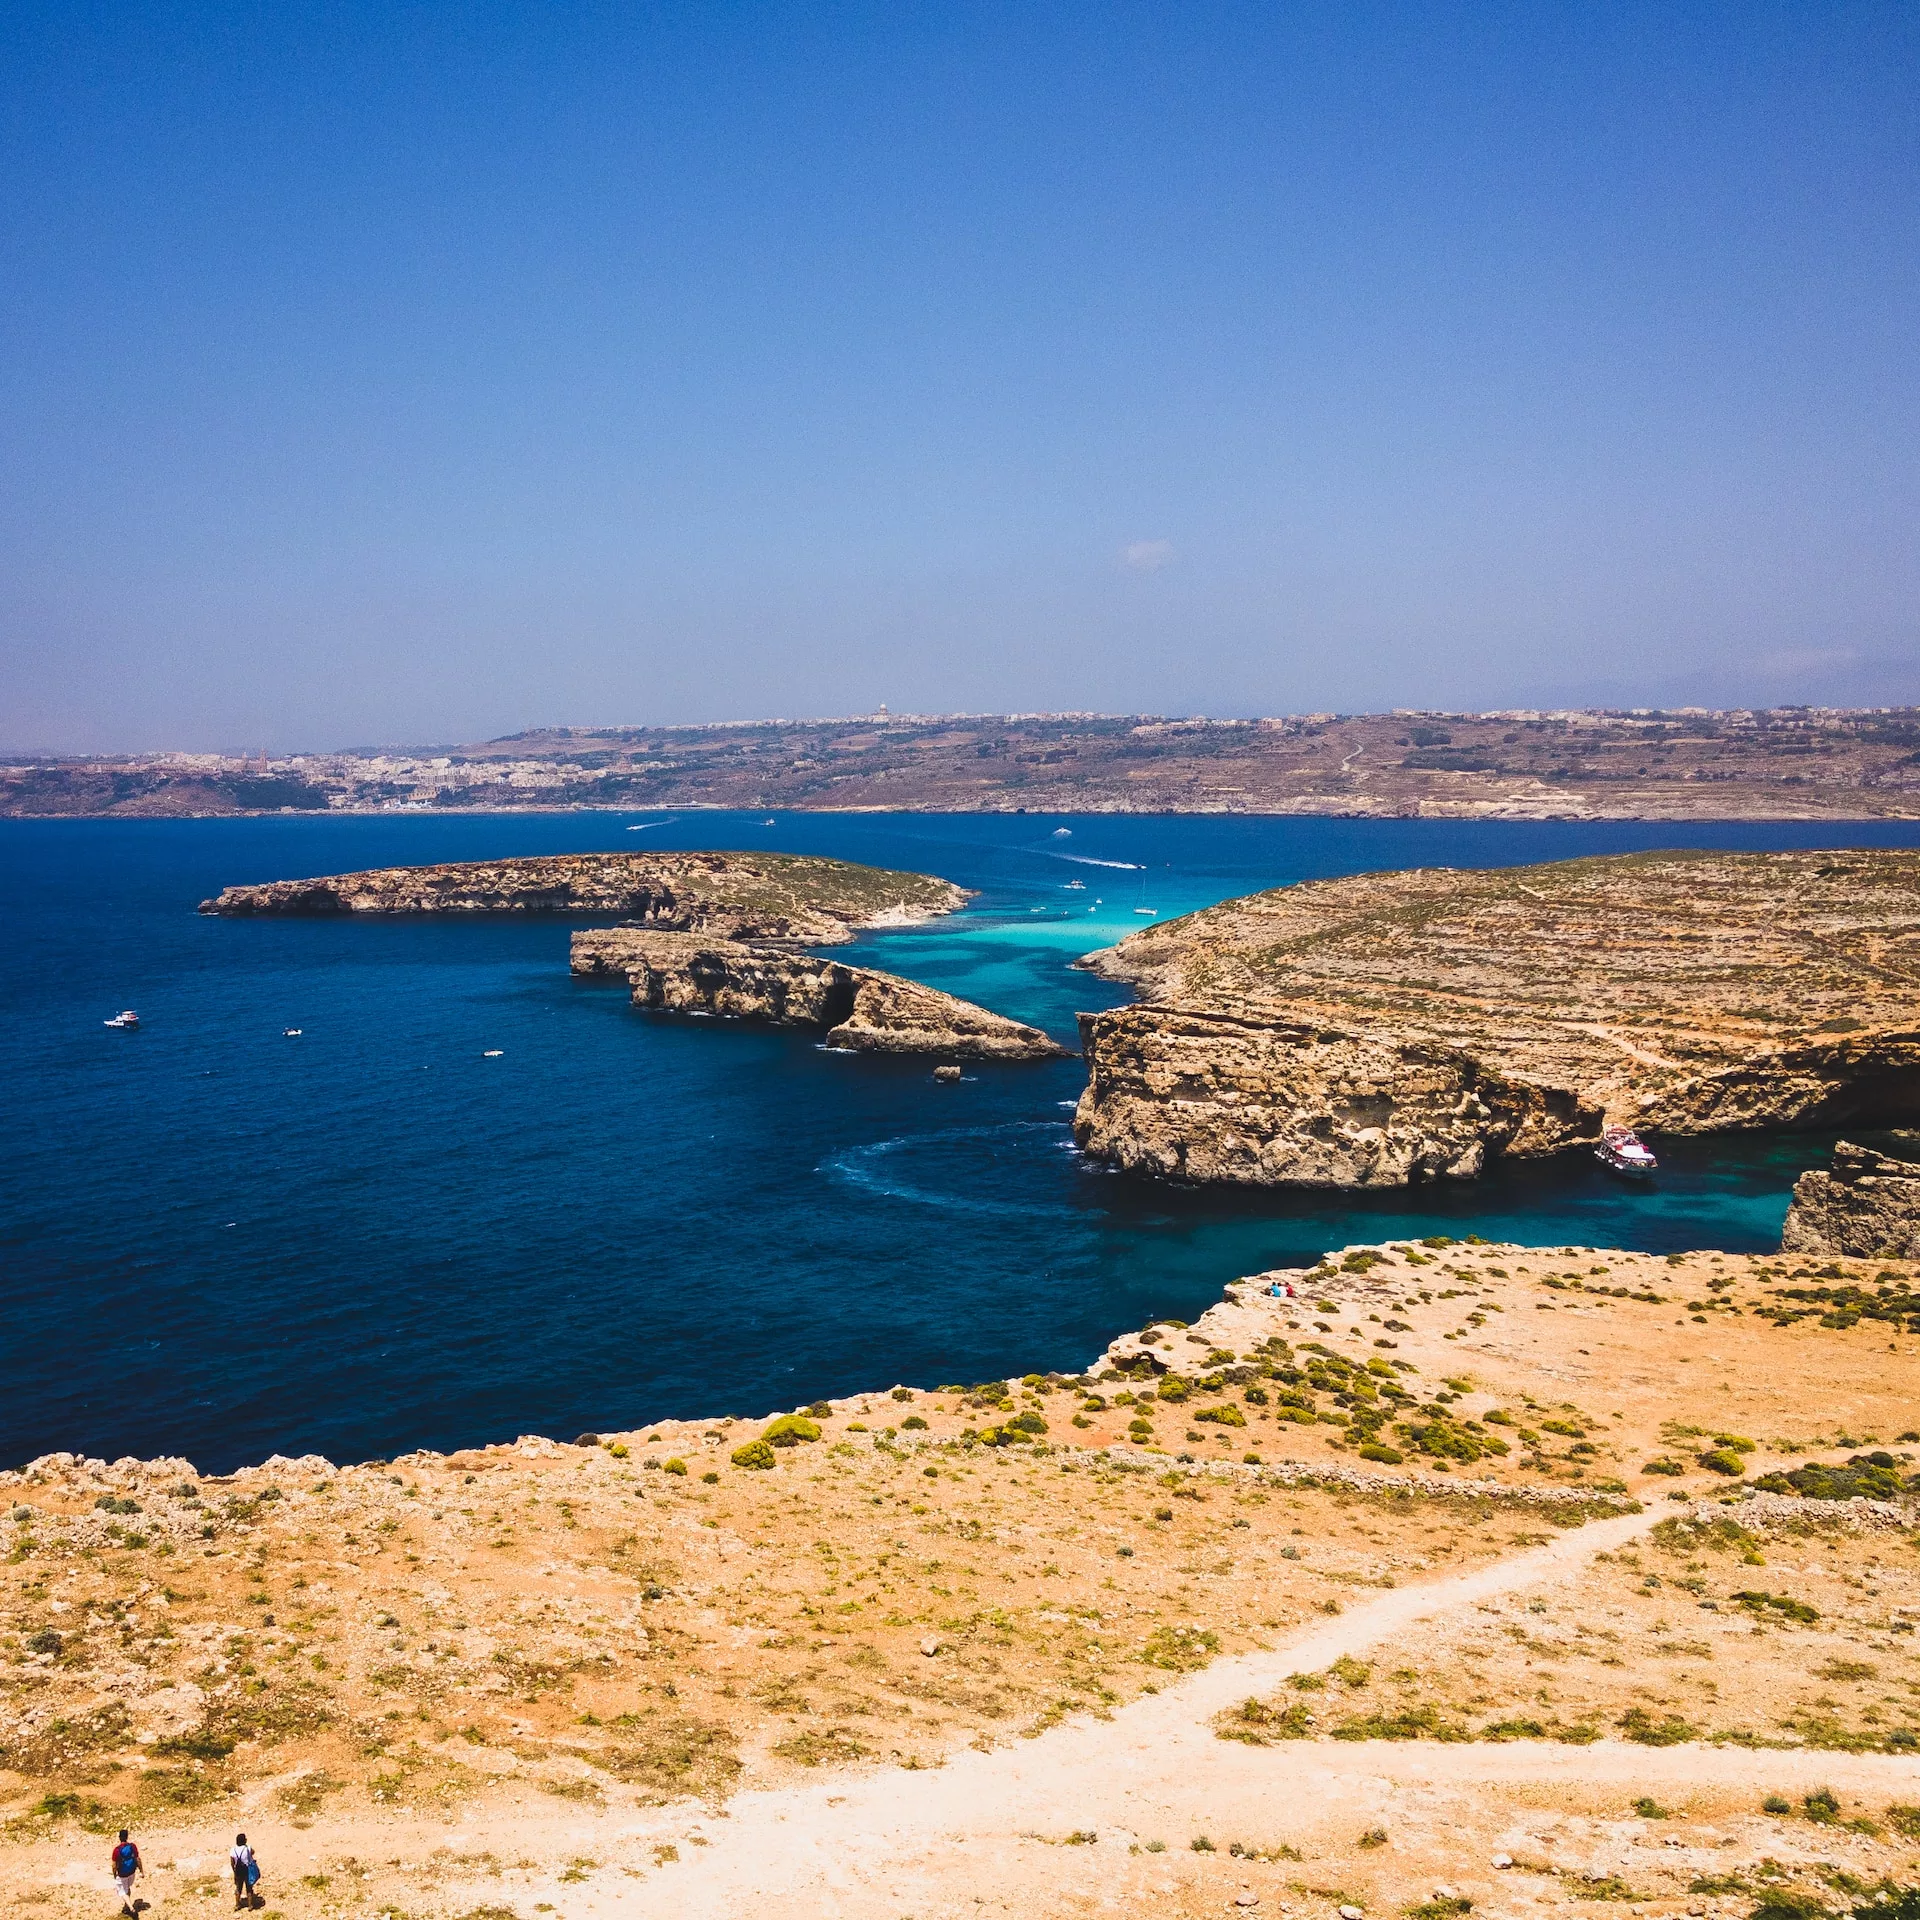 Blue Lagoon Malta (Comino Island) - How to Get Here & What to Do